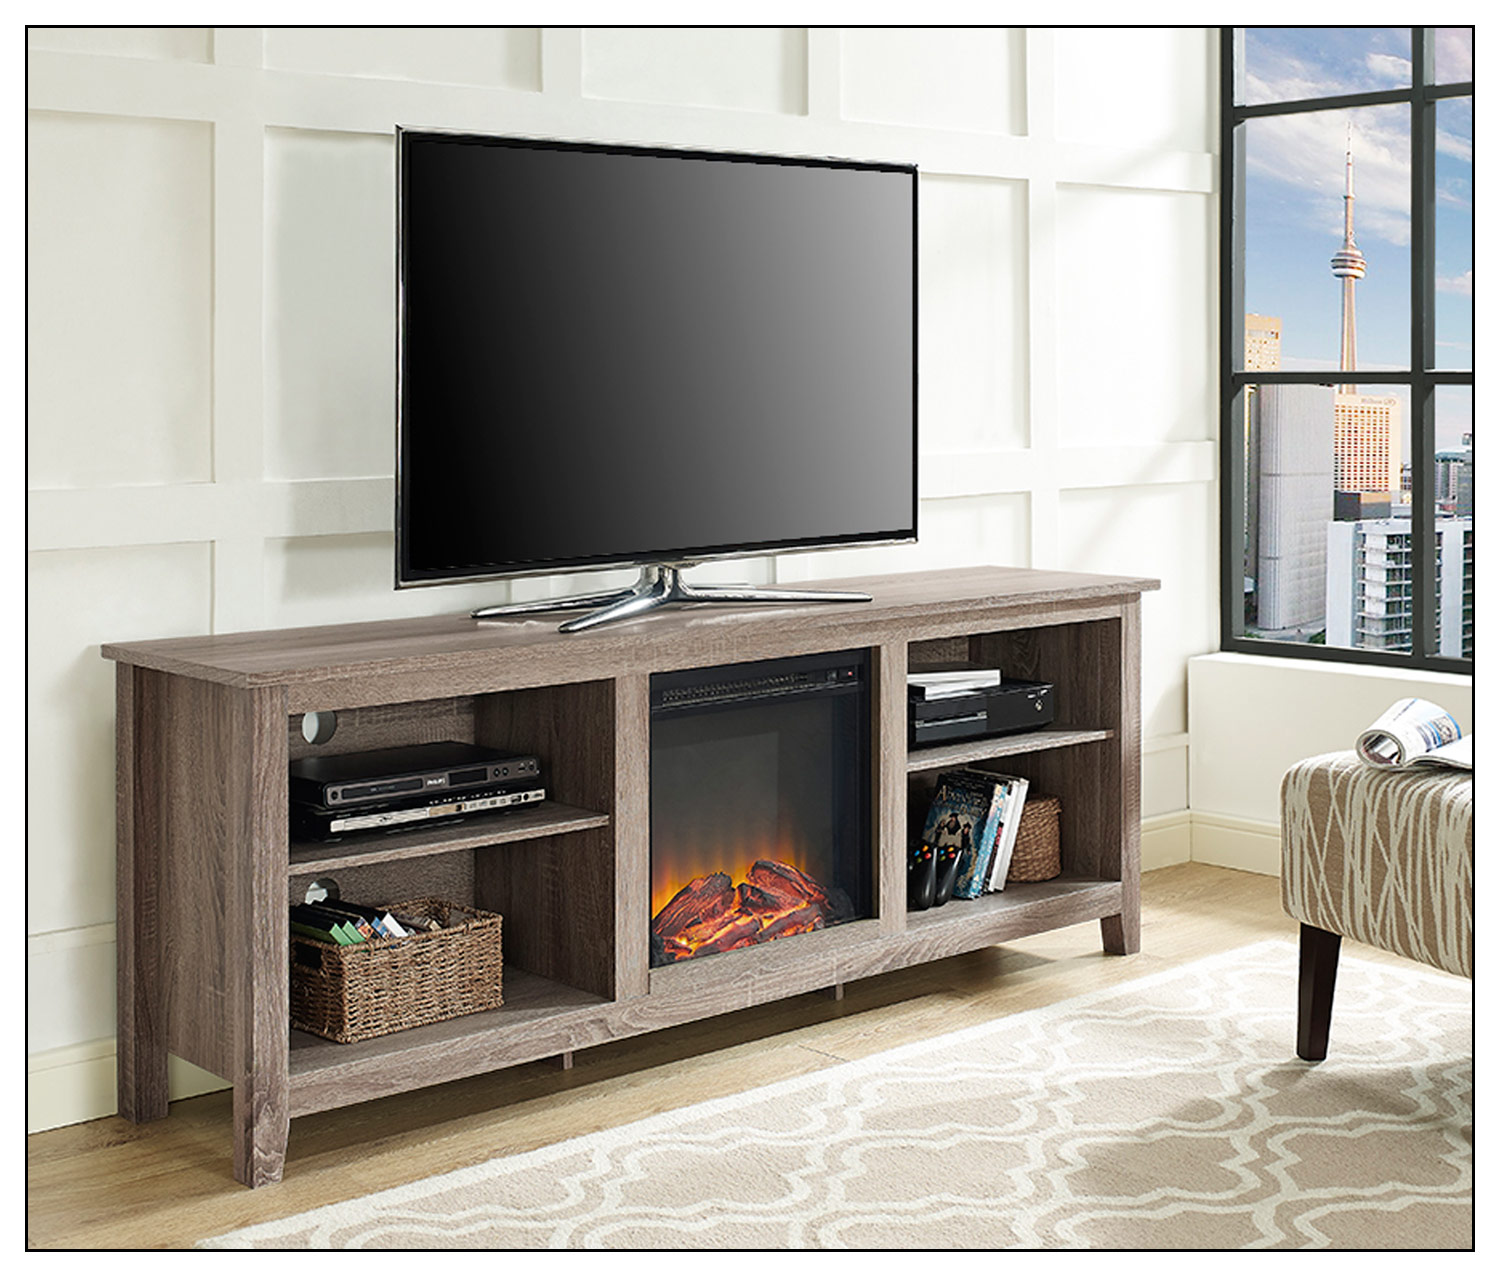 Angle View: Walker Edison - Open Storage Fireplace TV Stand for Most TVs Up to 85" - Driftwood